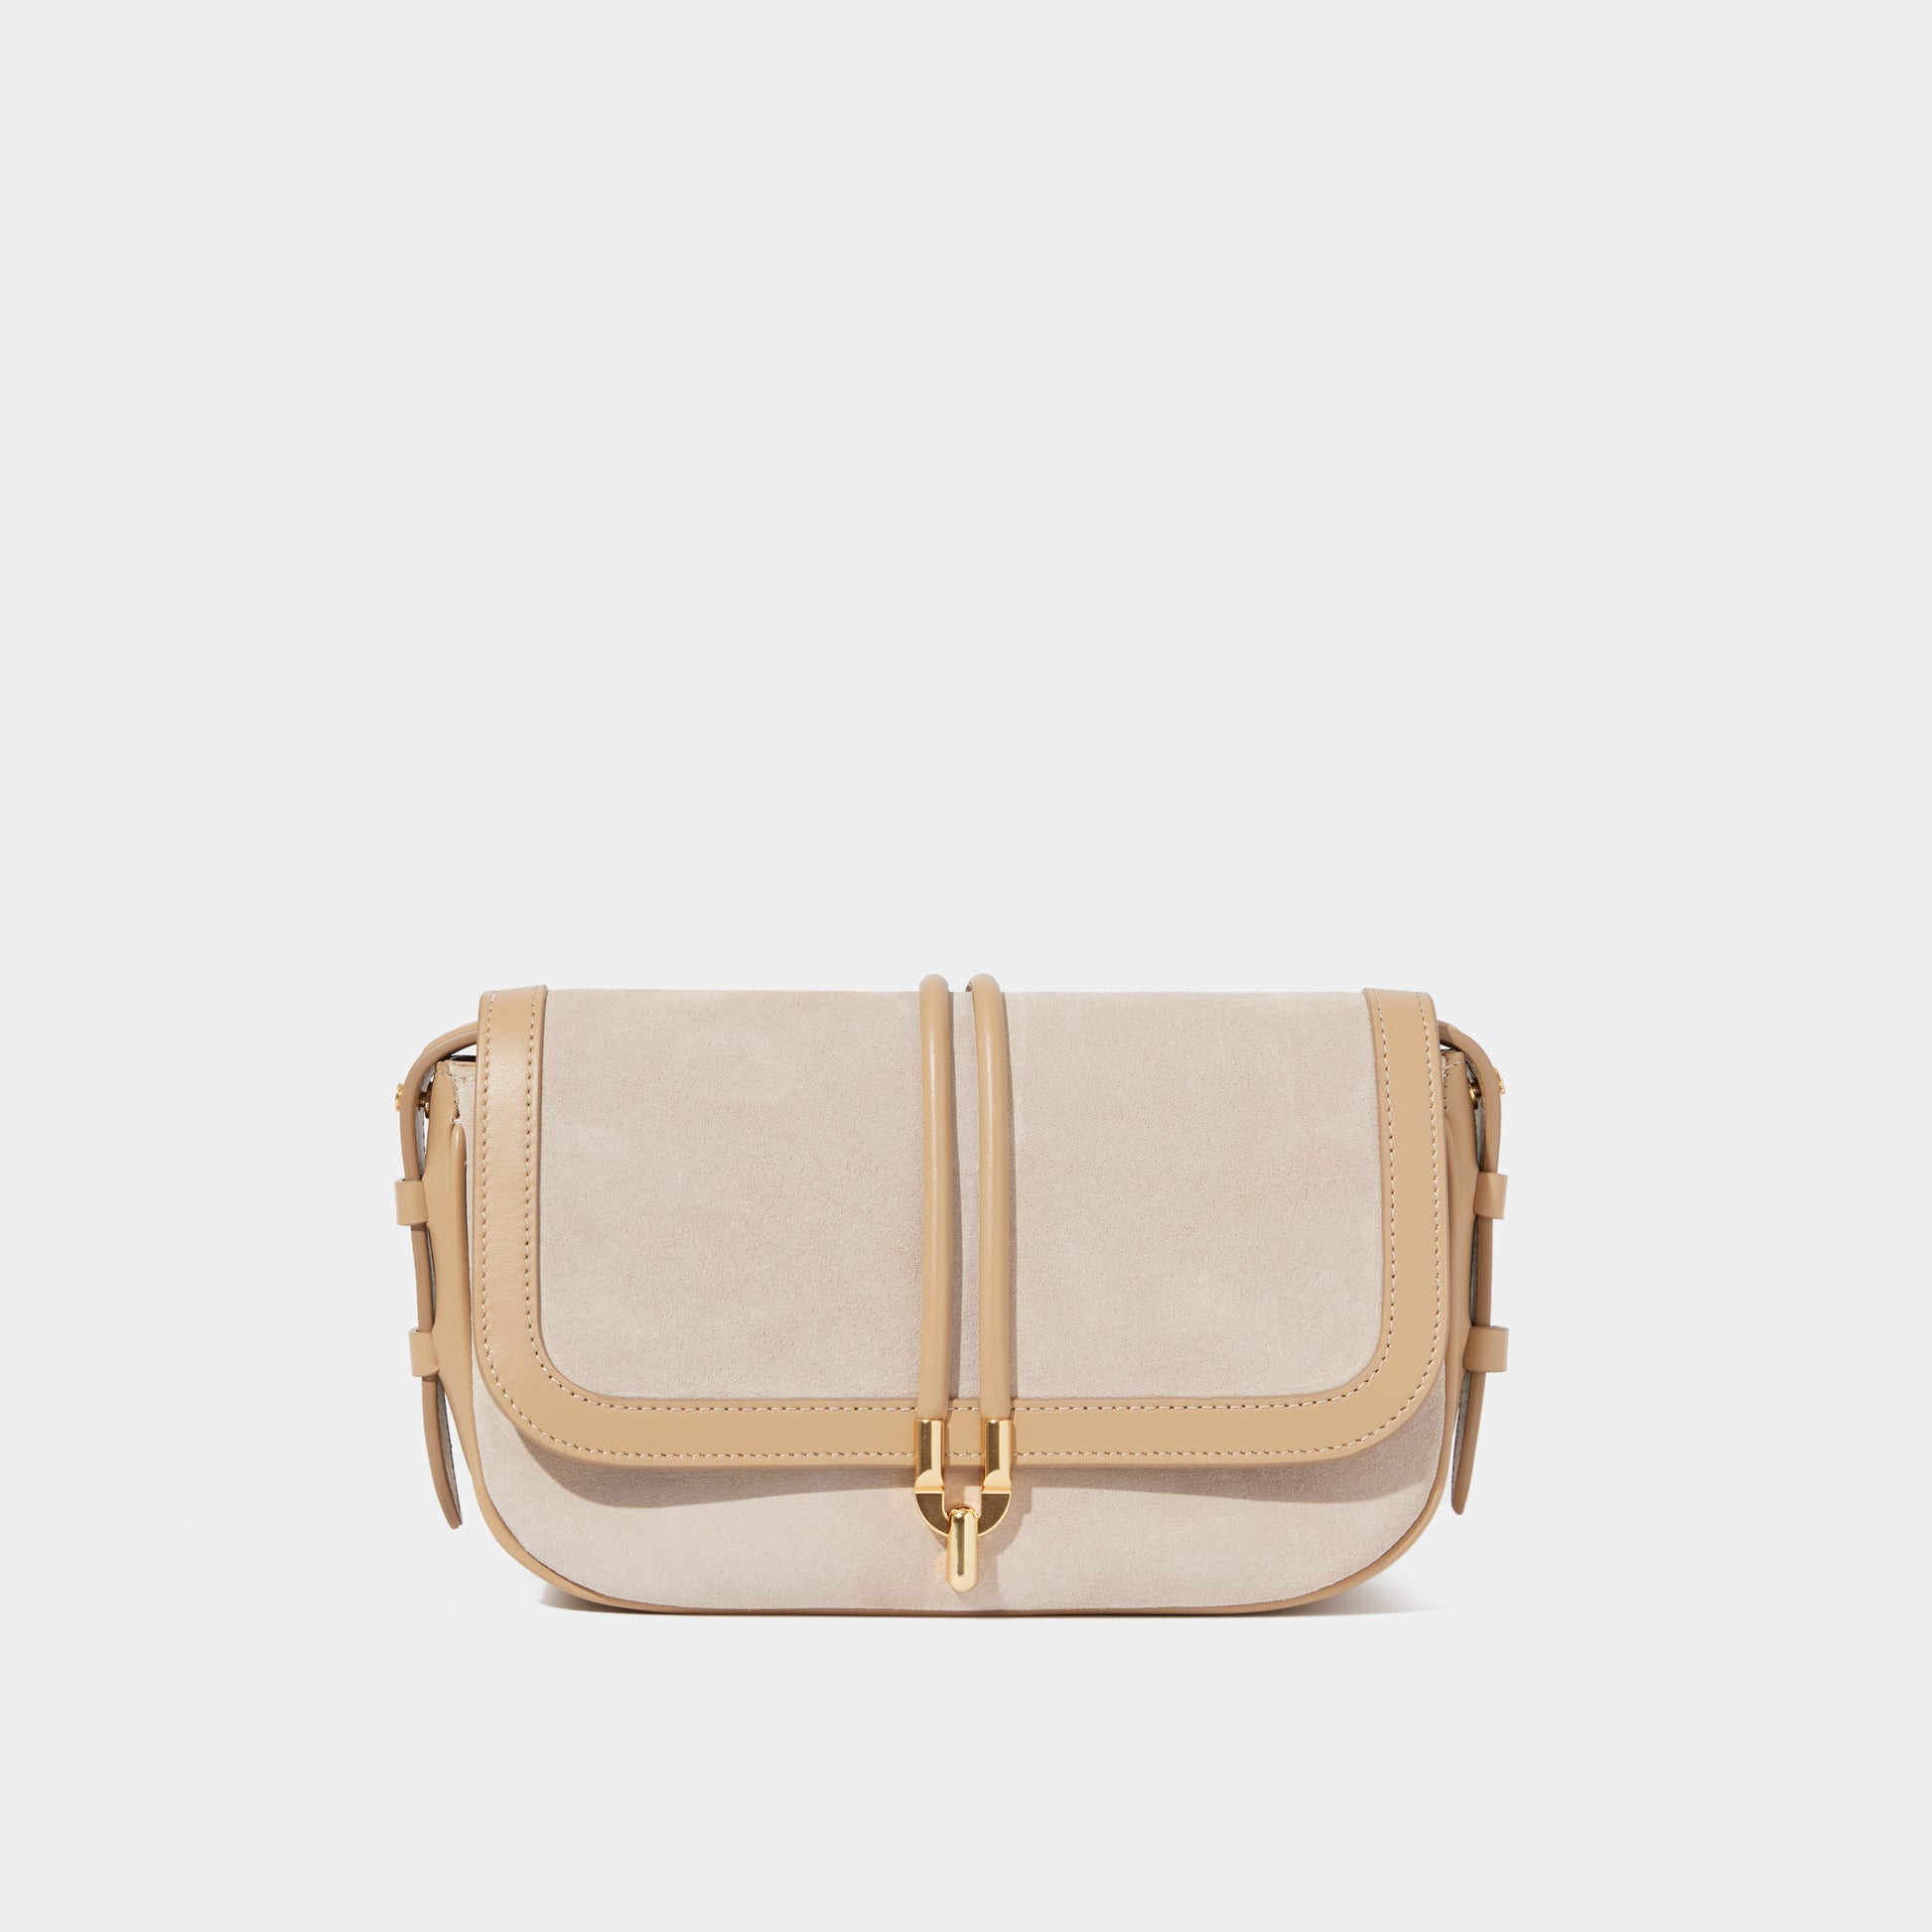 Compare prices for SORBONNE flap bag in suede and vintage leather